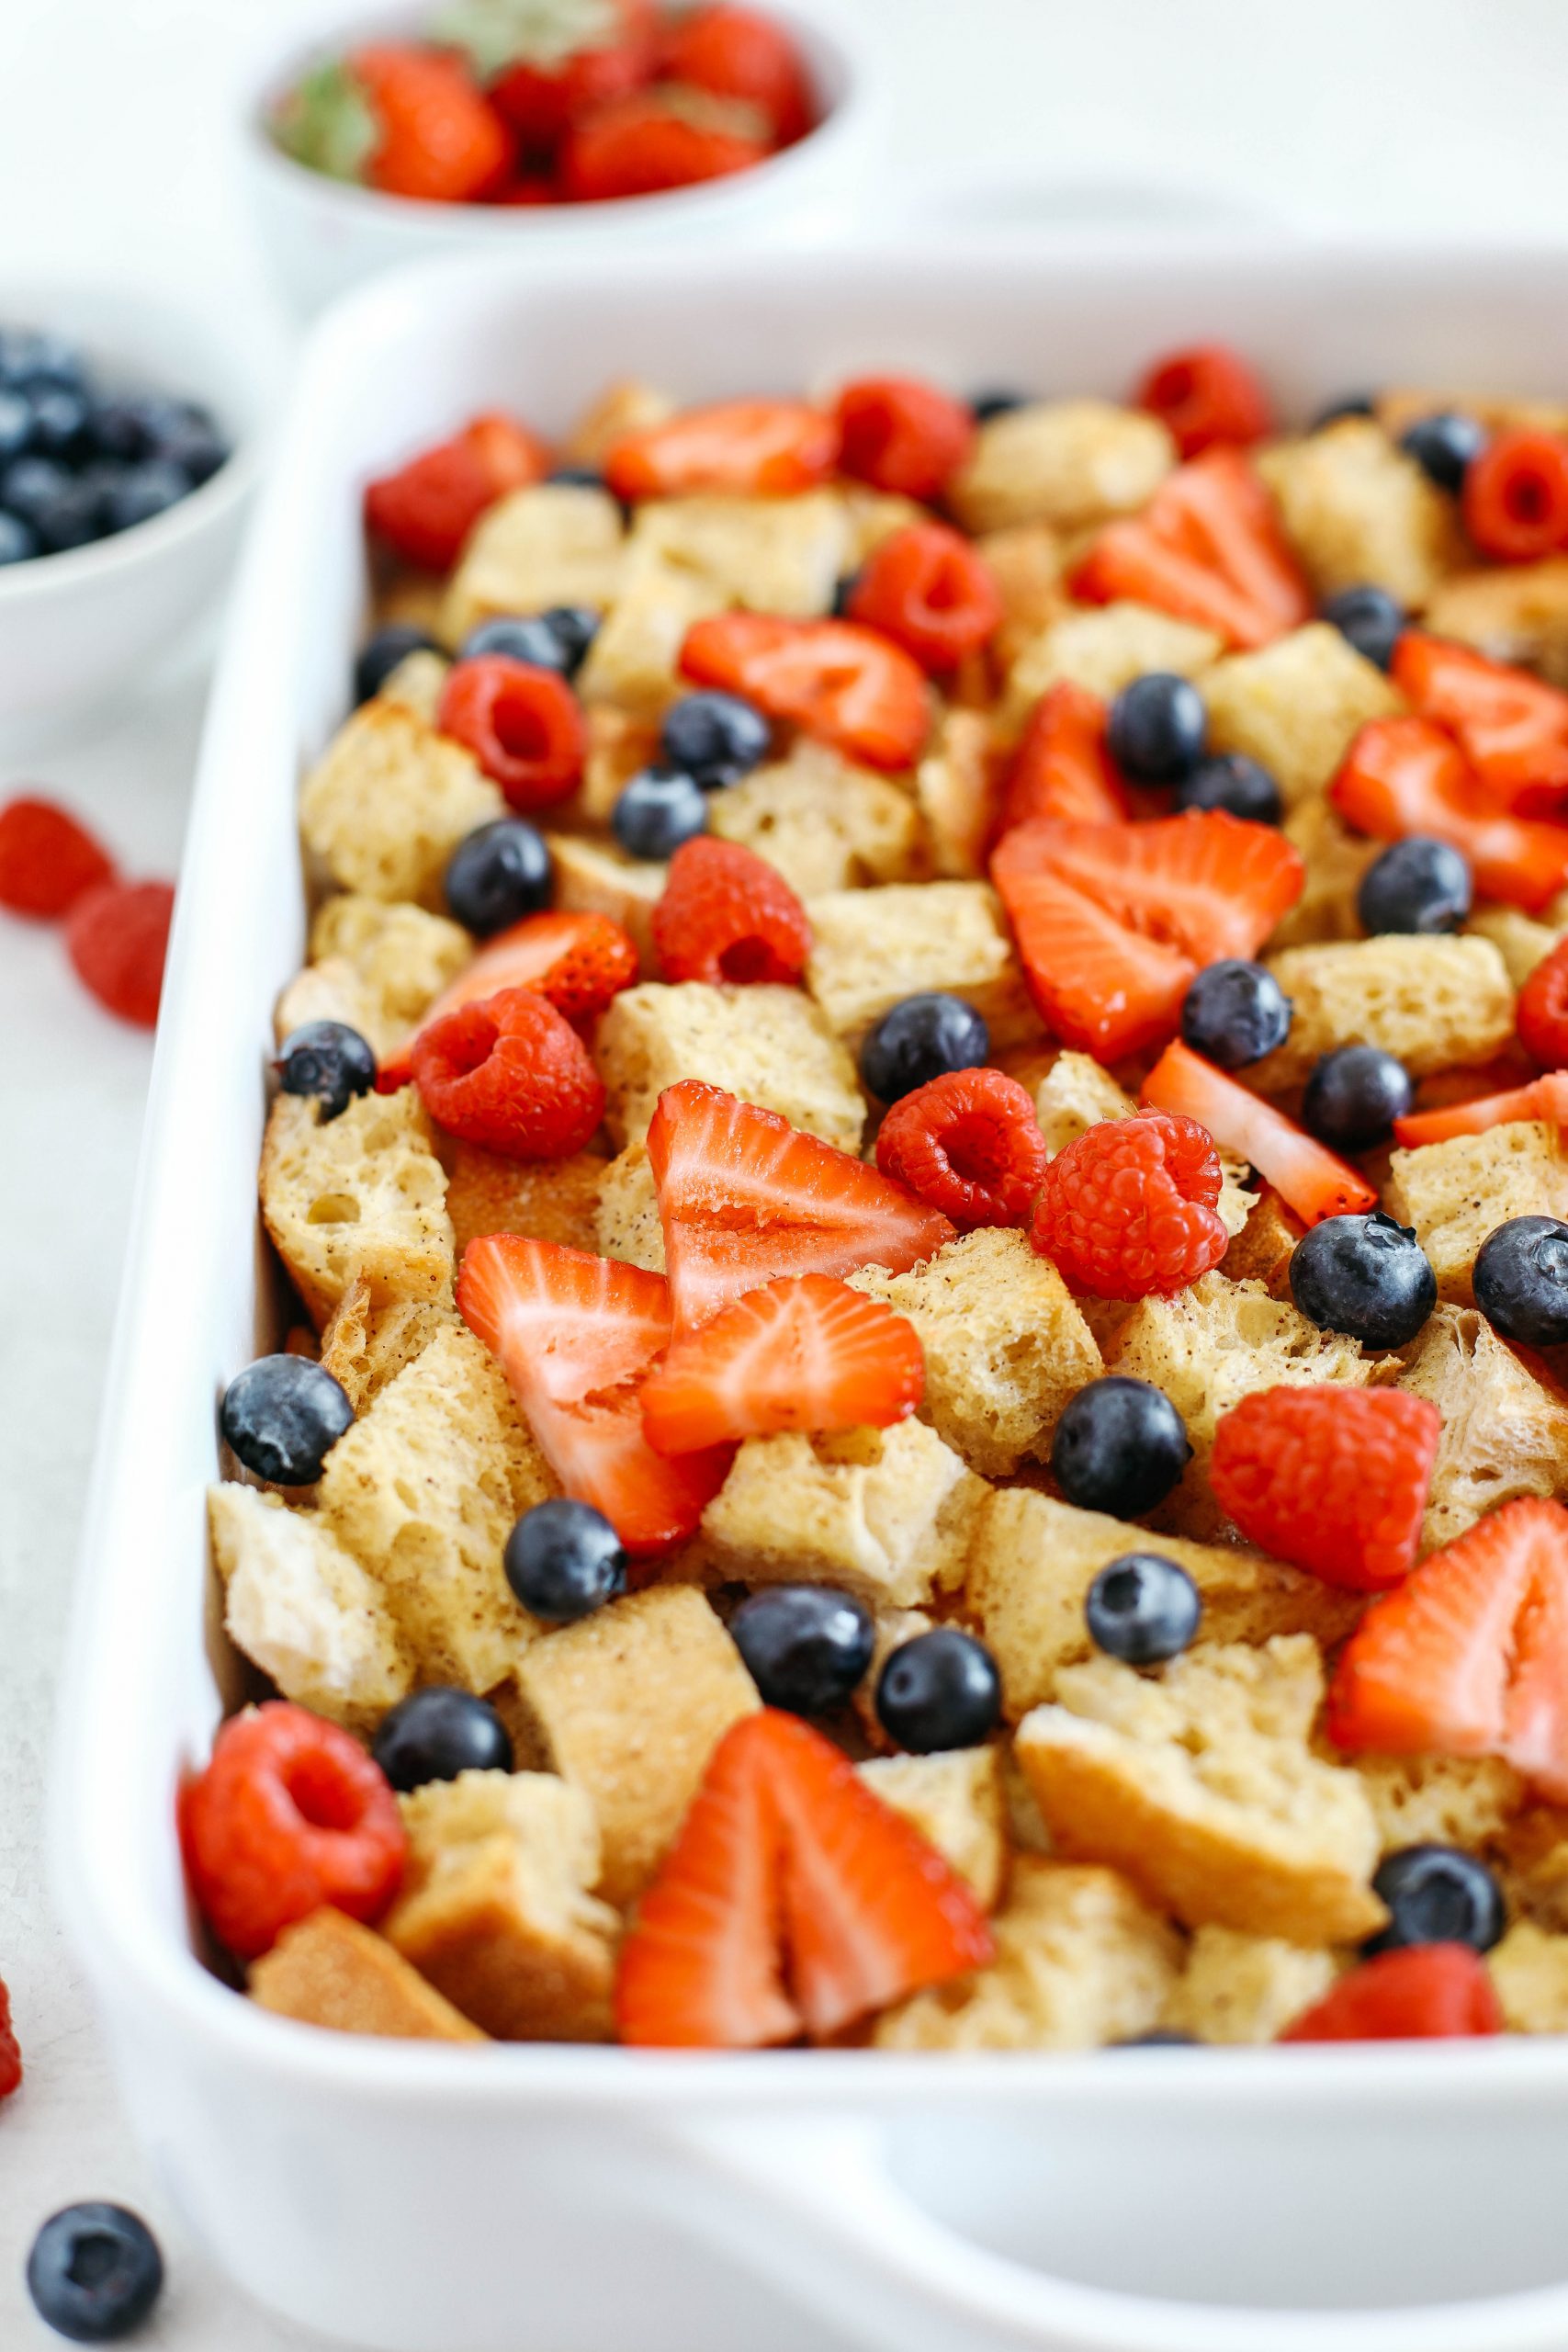 Warm and flavorful Mixed Berry French Toast Casserole with a delicious cream cheese drizzle that can easily be made the night before for the perfect morning breakfast!